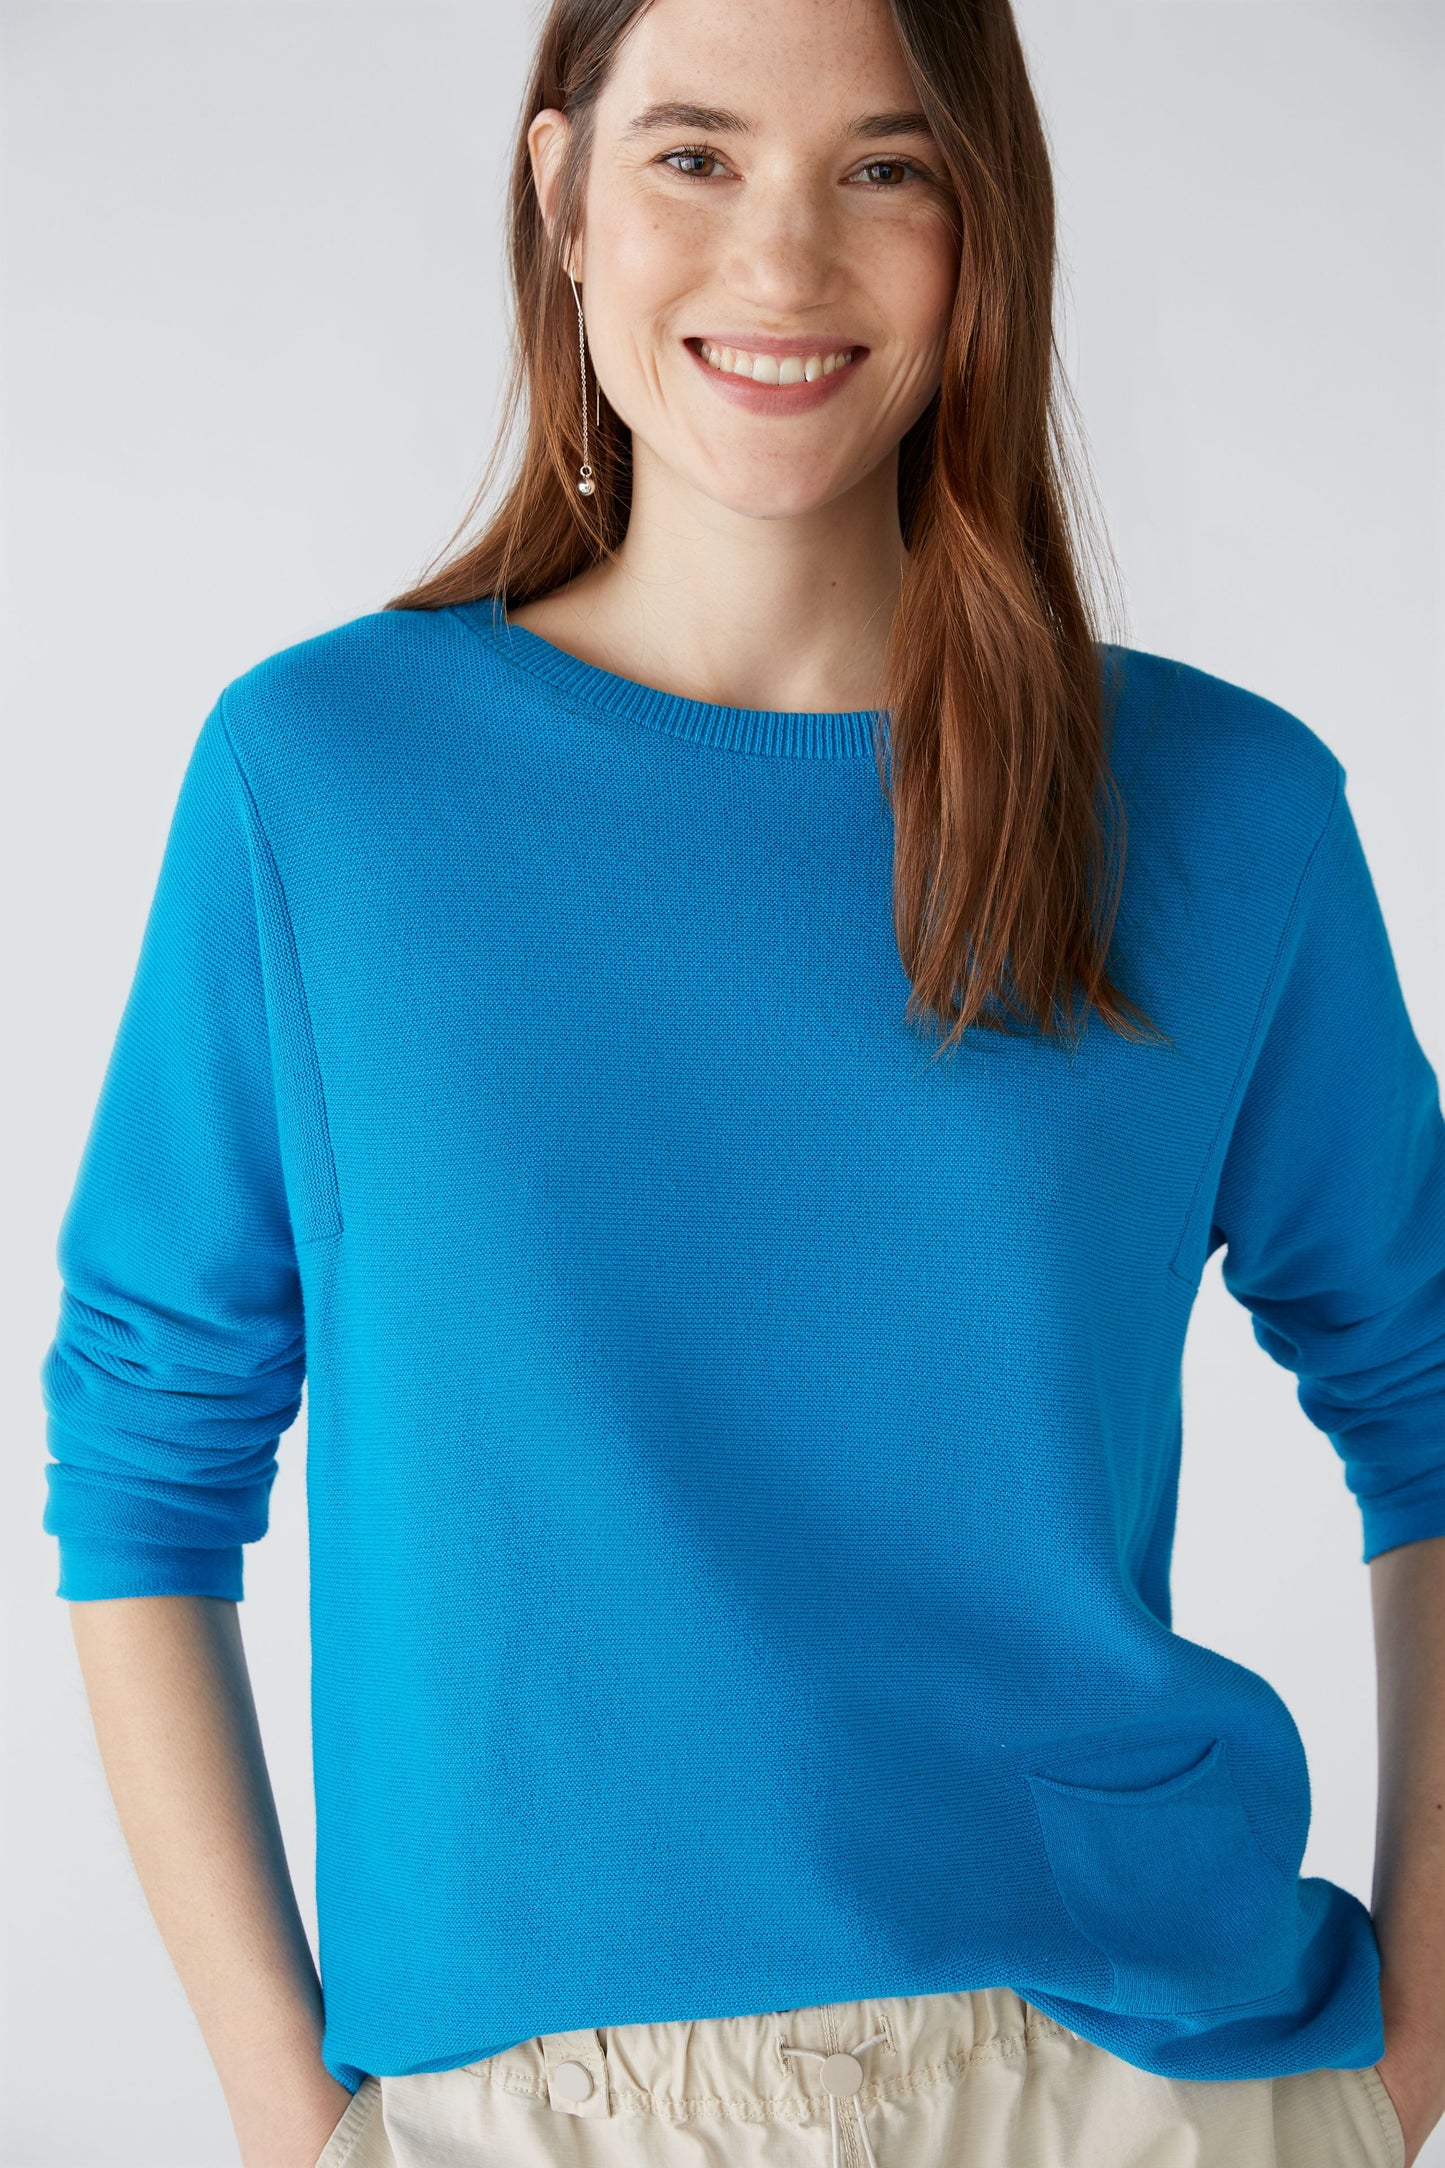 Oui Turquoise Sweater